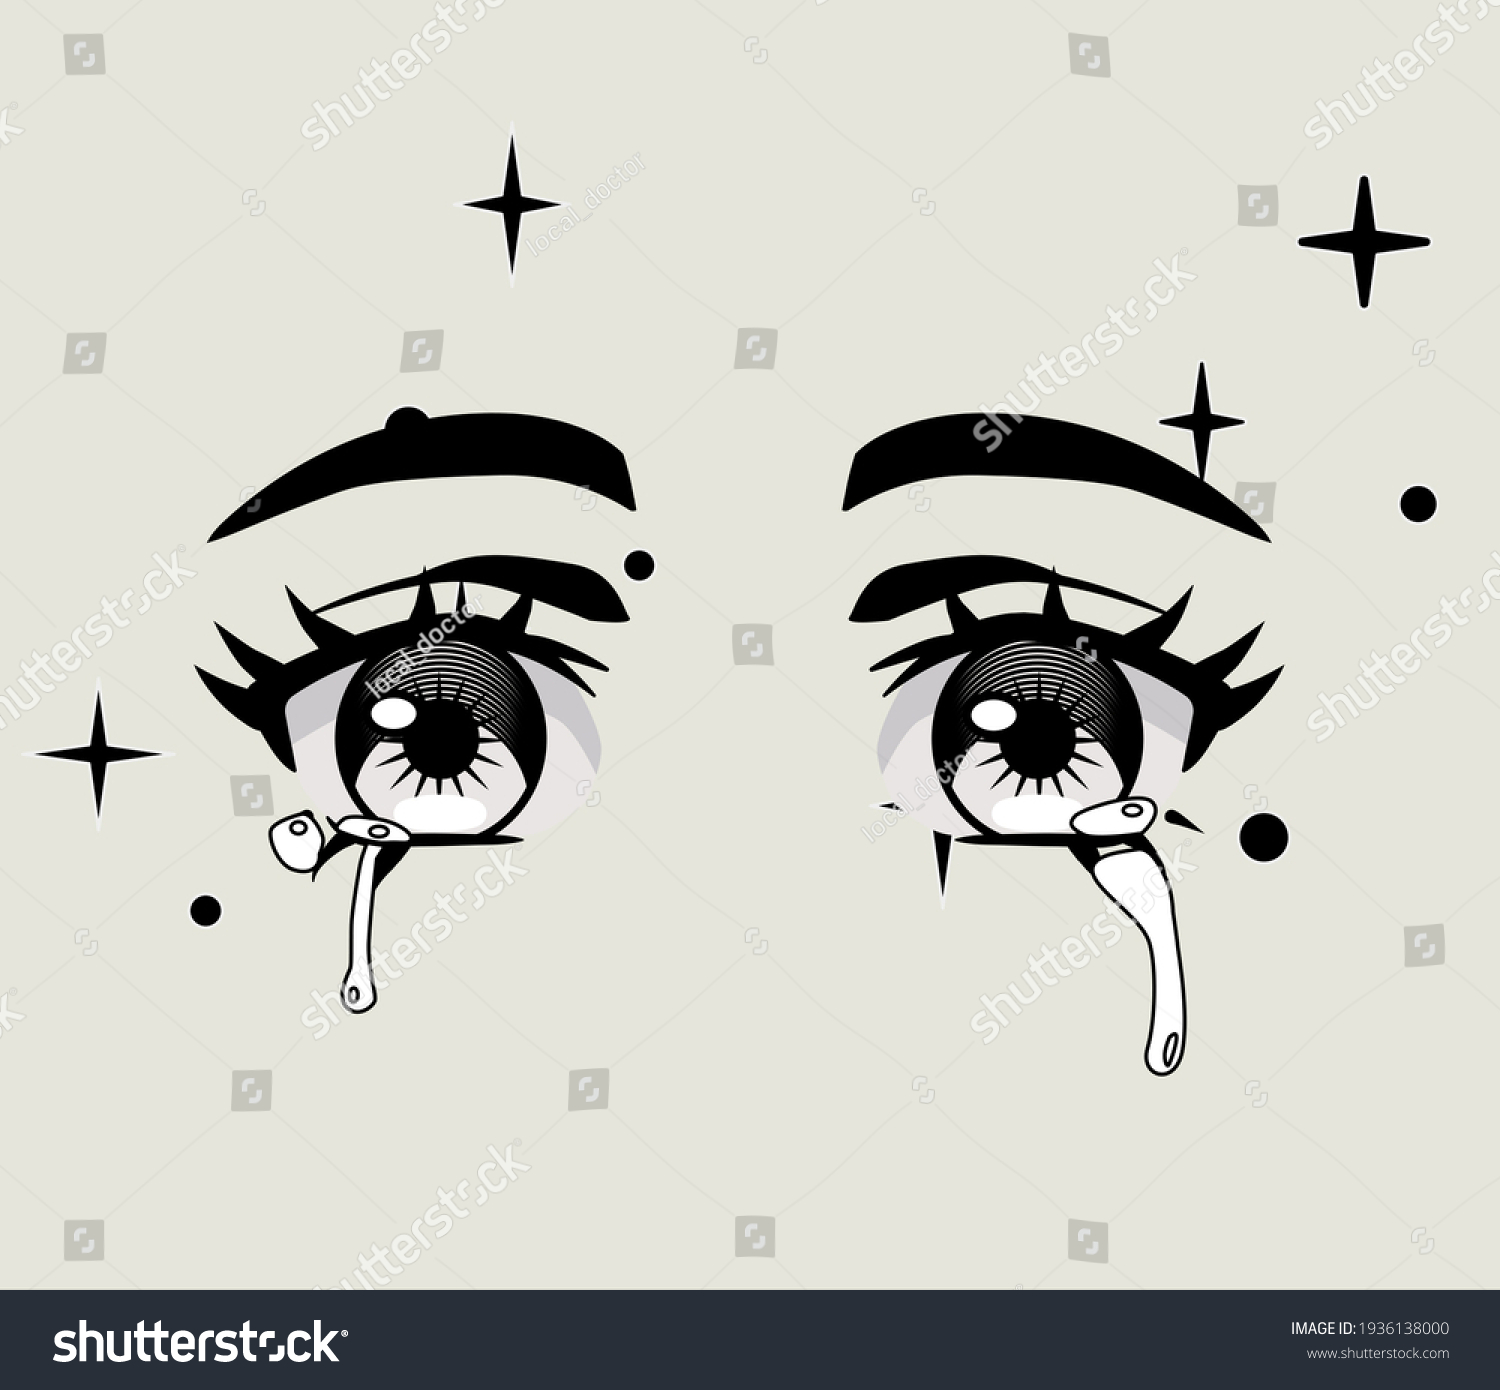 1,736 Crying anime eyes Images, Stock Photos & Vectors | Shutterstock